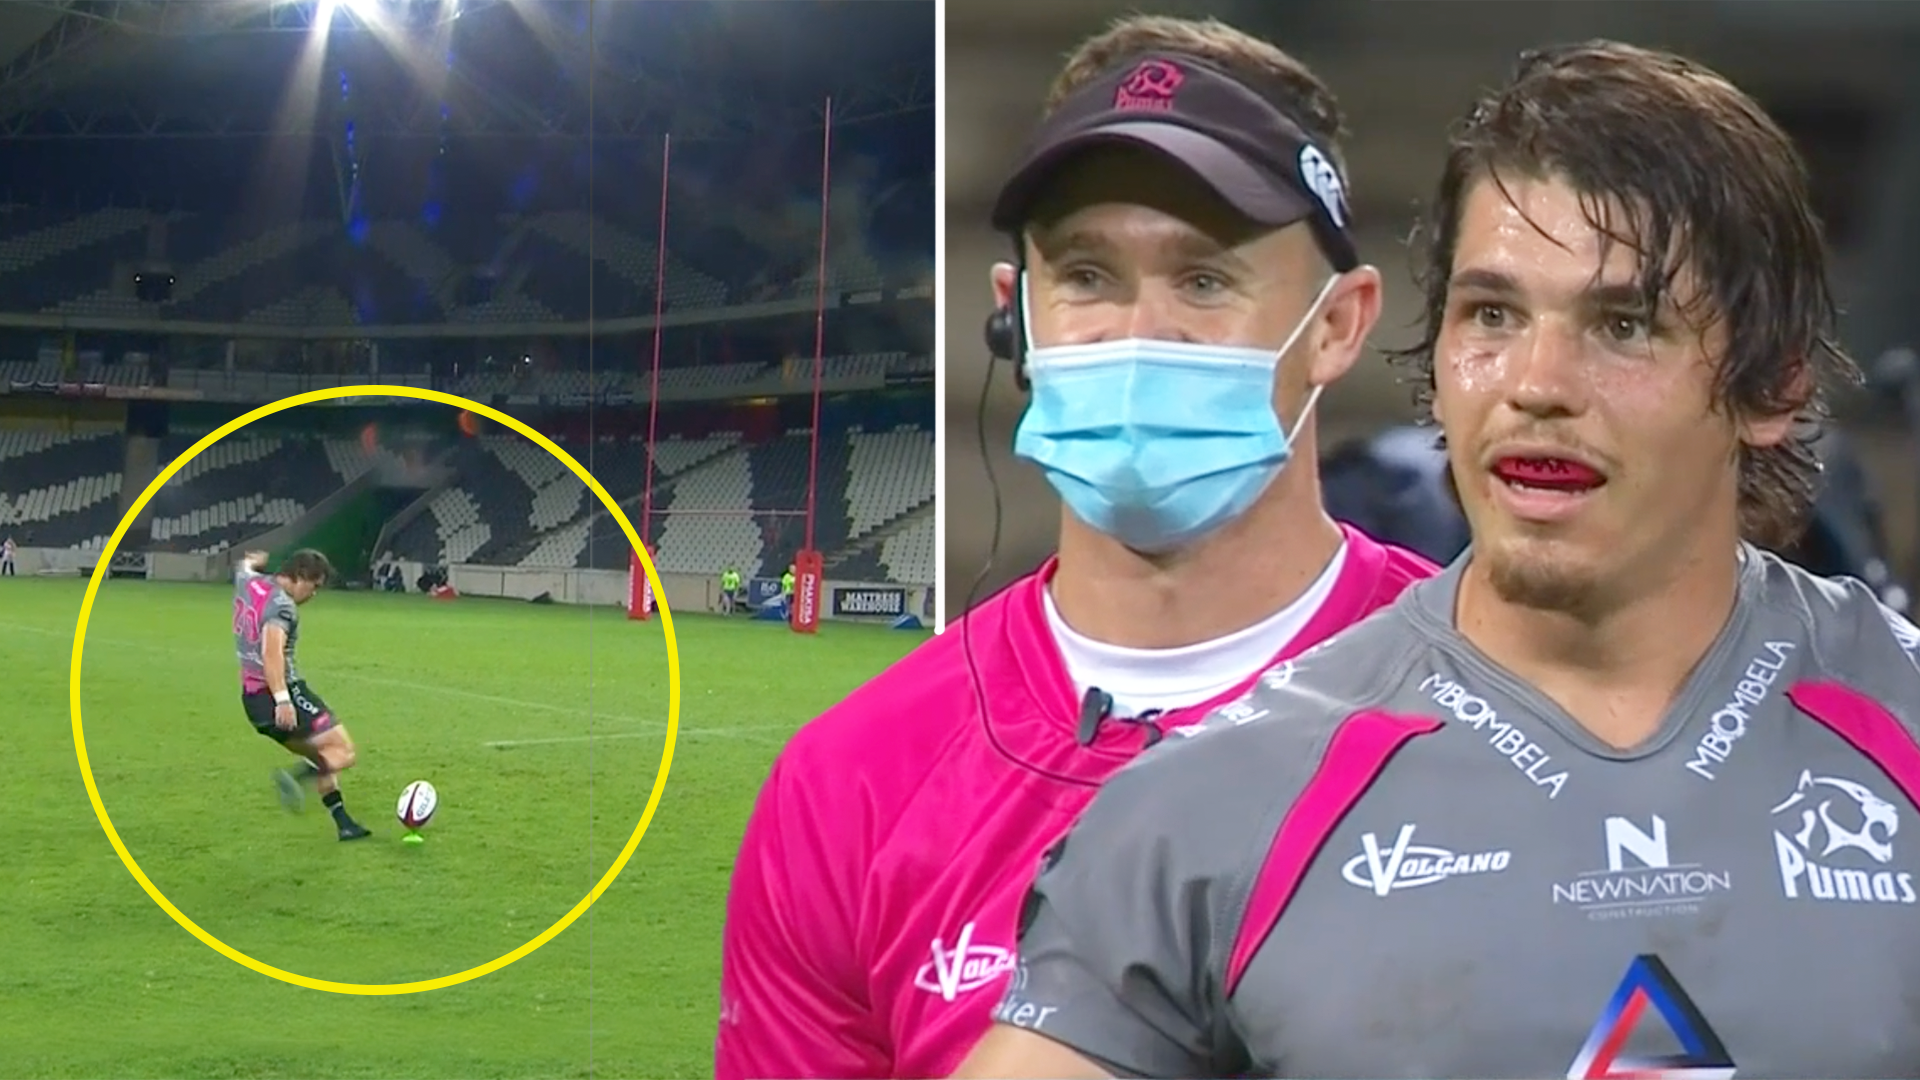 Anger and disbelief as referee awards crucial missed conversion in shocking South Africa scandal